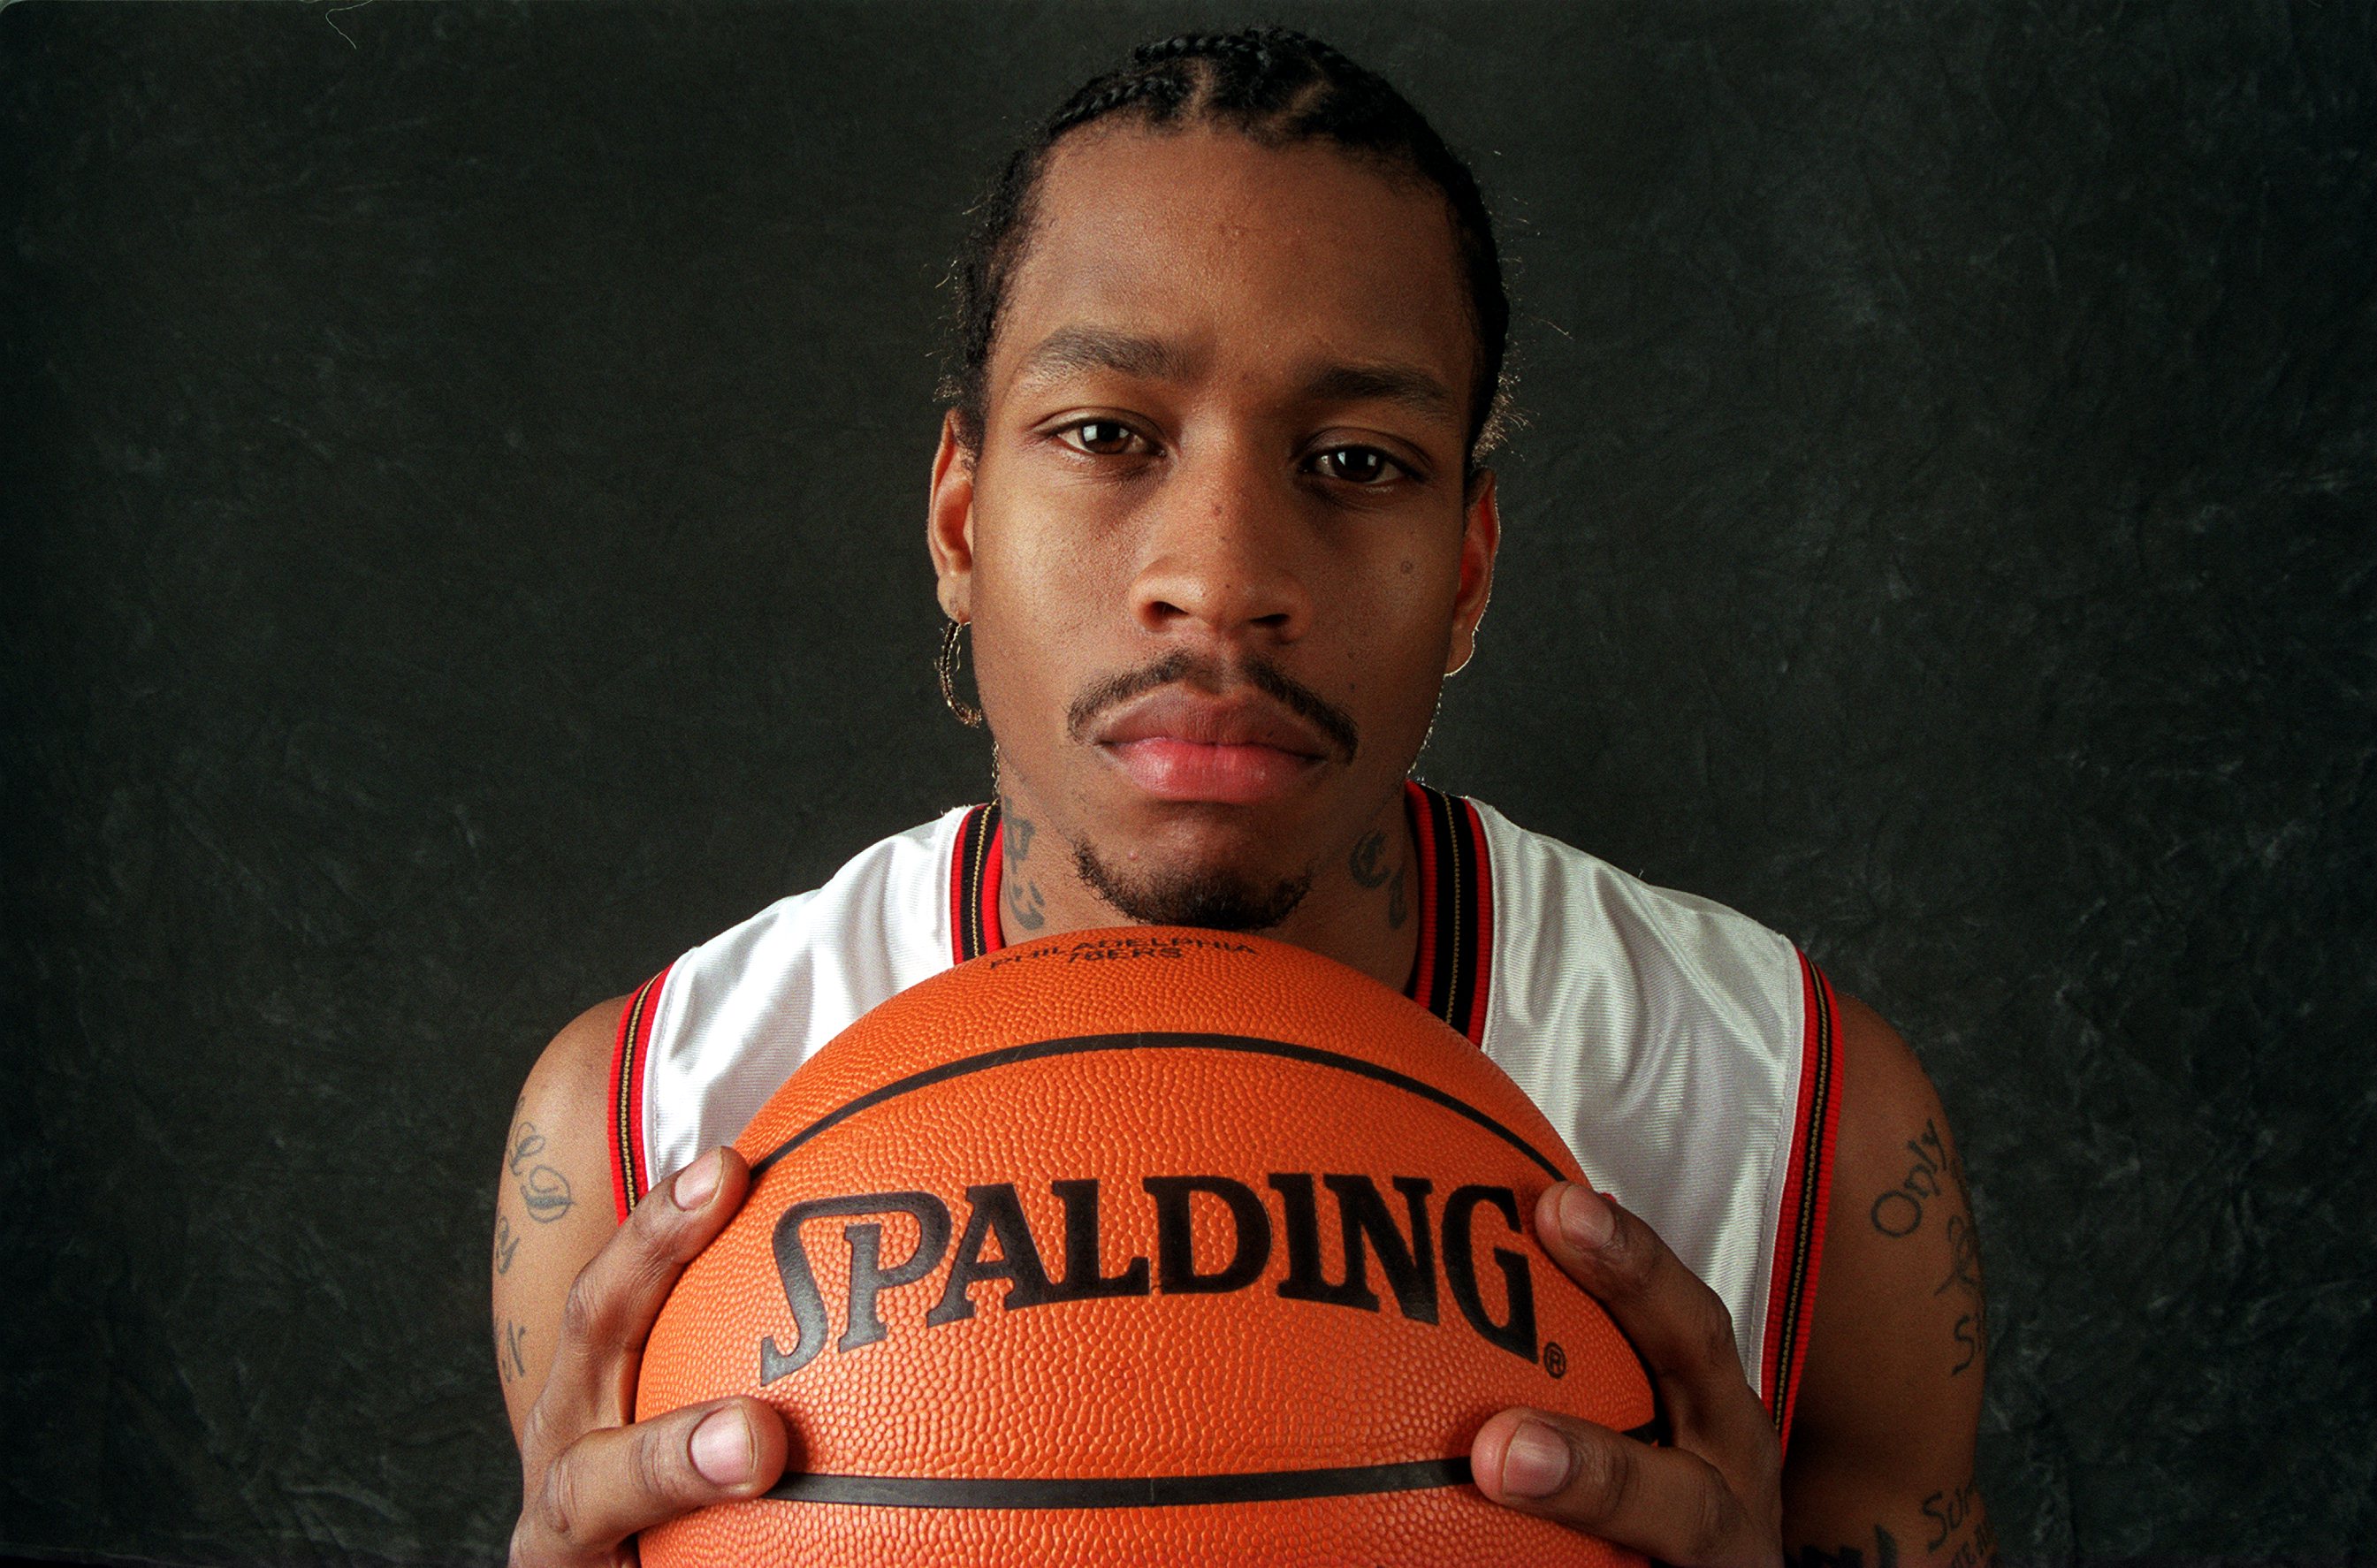 Allen Iverson rescued Sixers at 1996 NBA draft